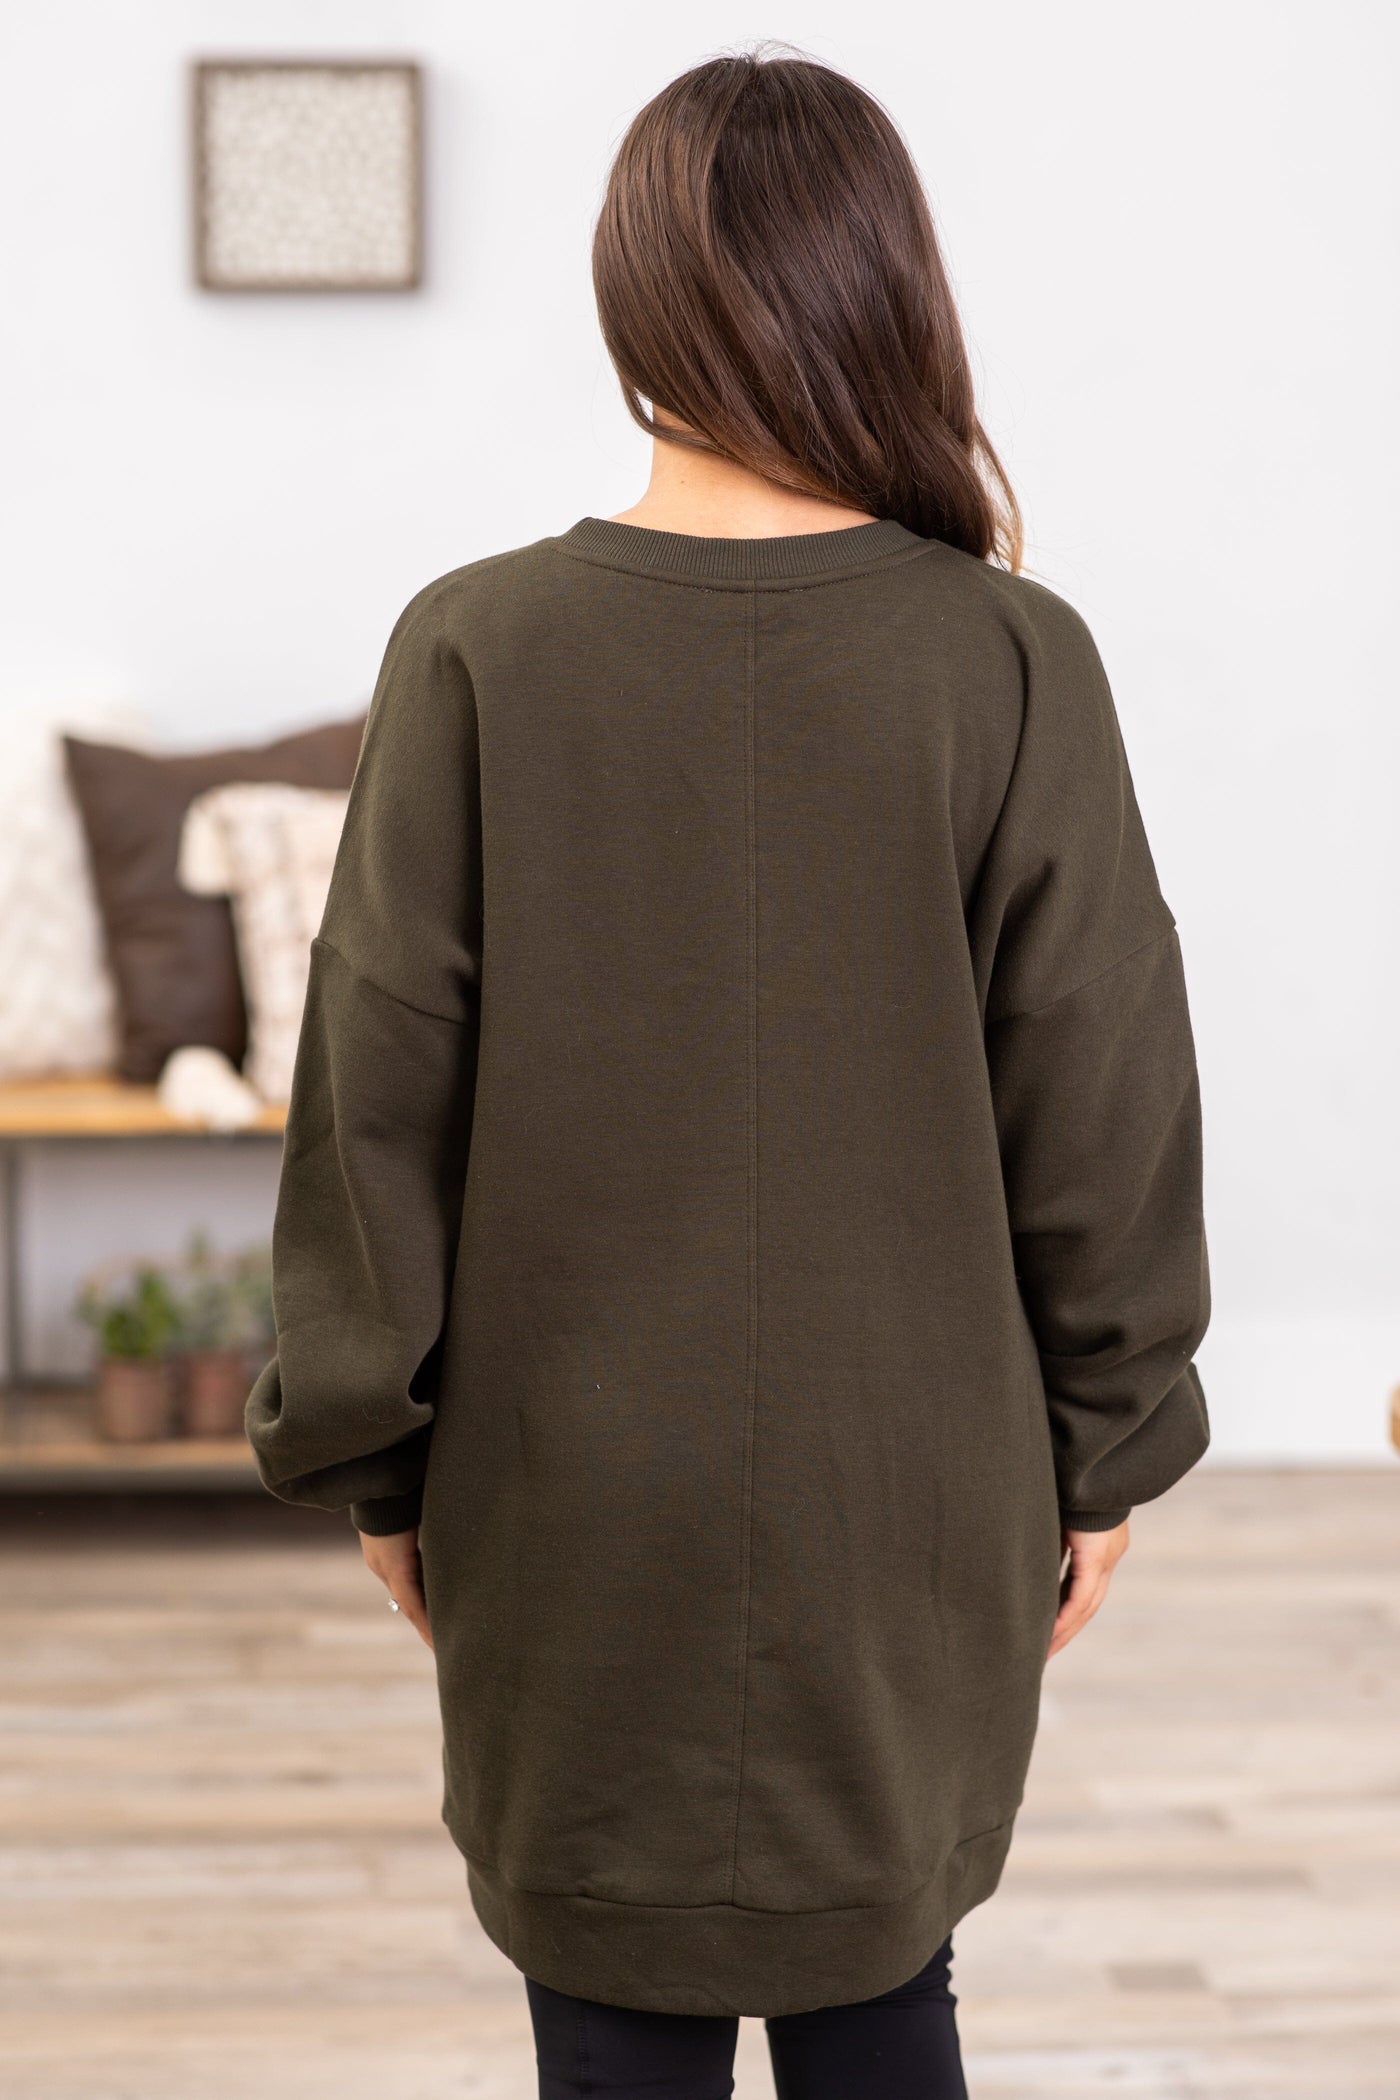 Olive Tunic Length Sweatshirt With Pockets - Filly Flair